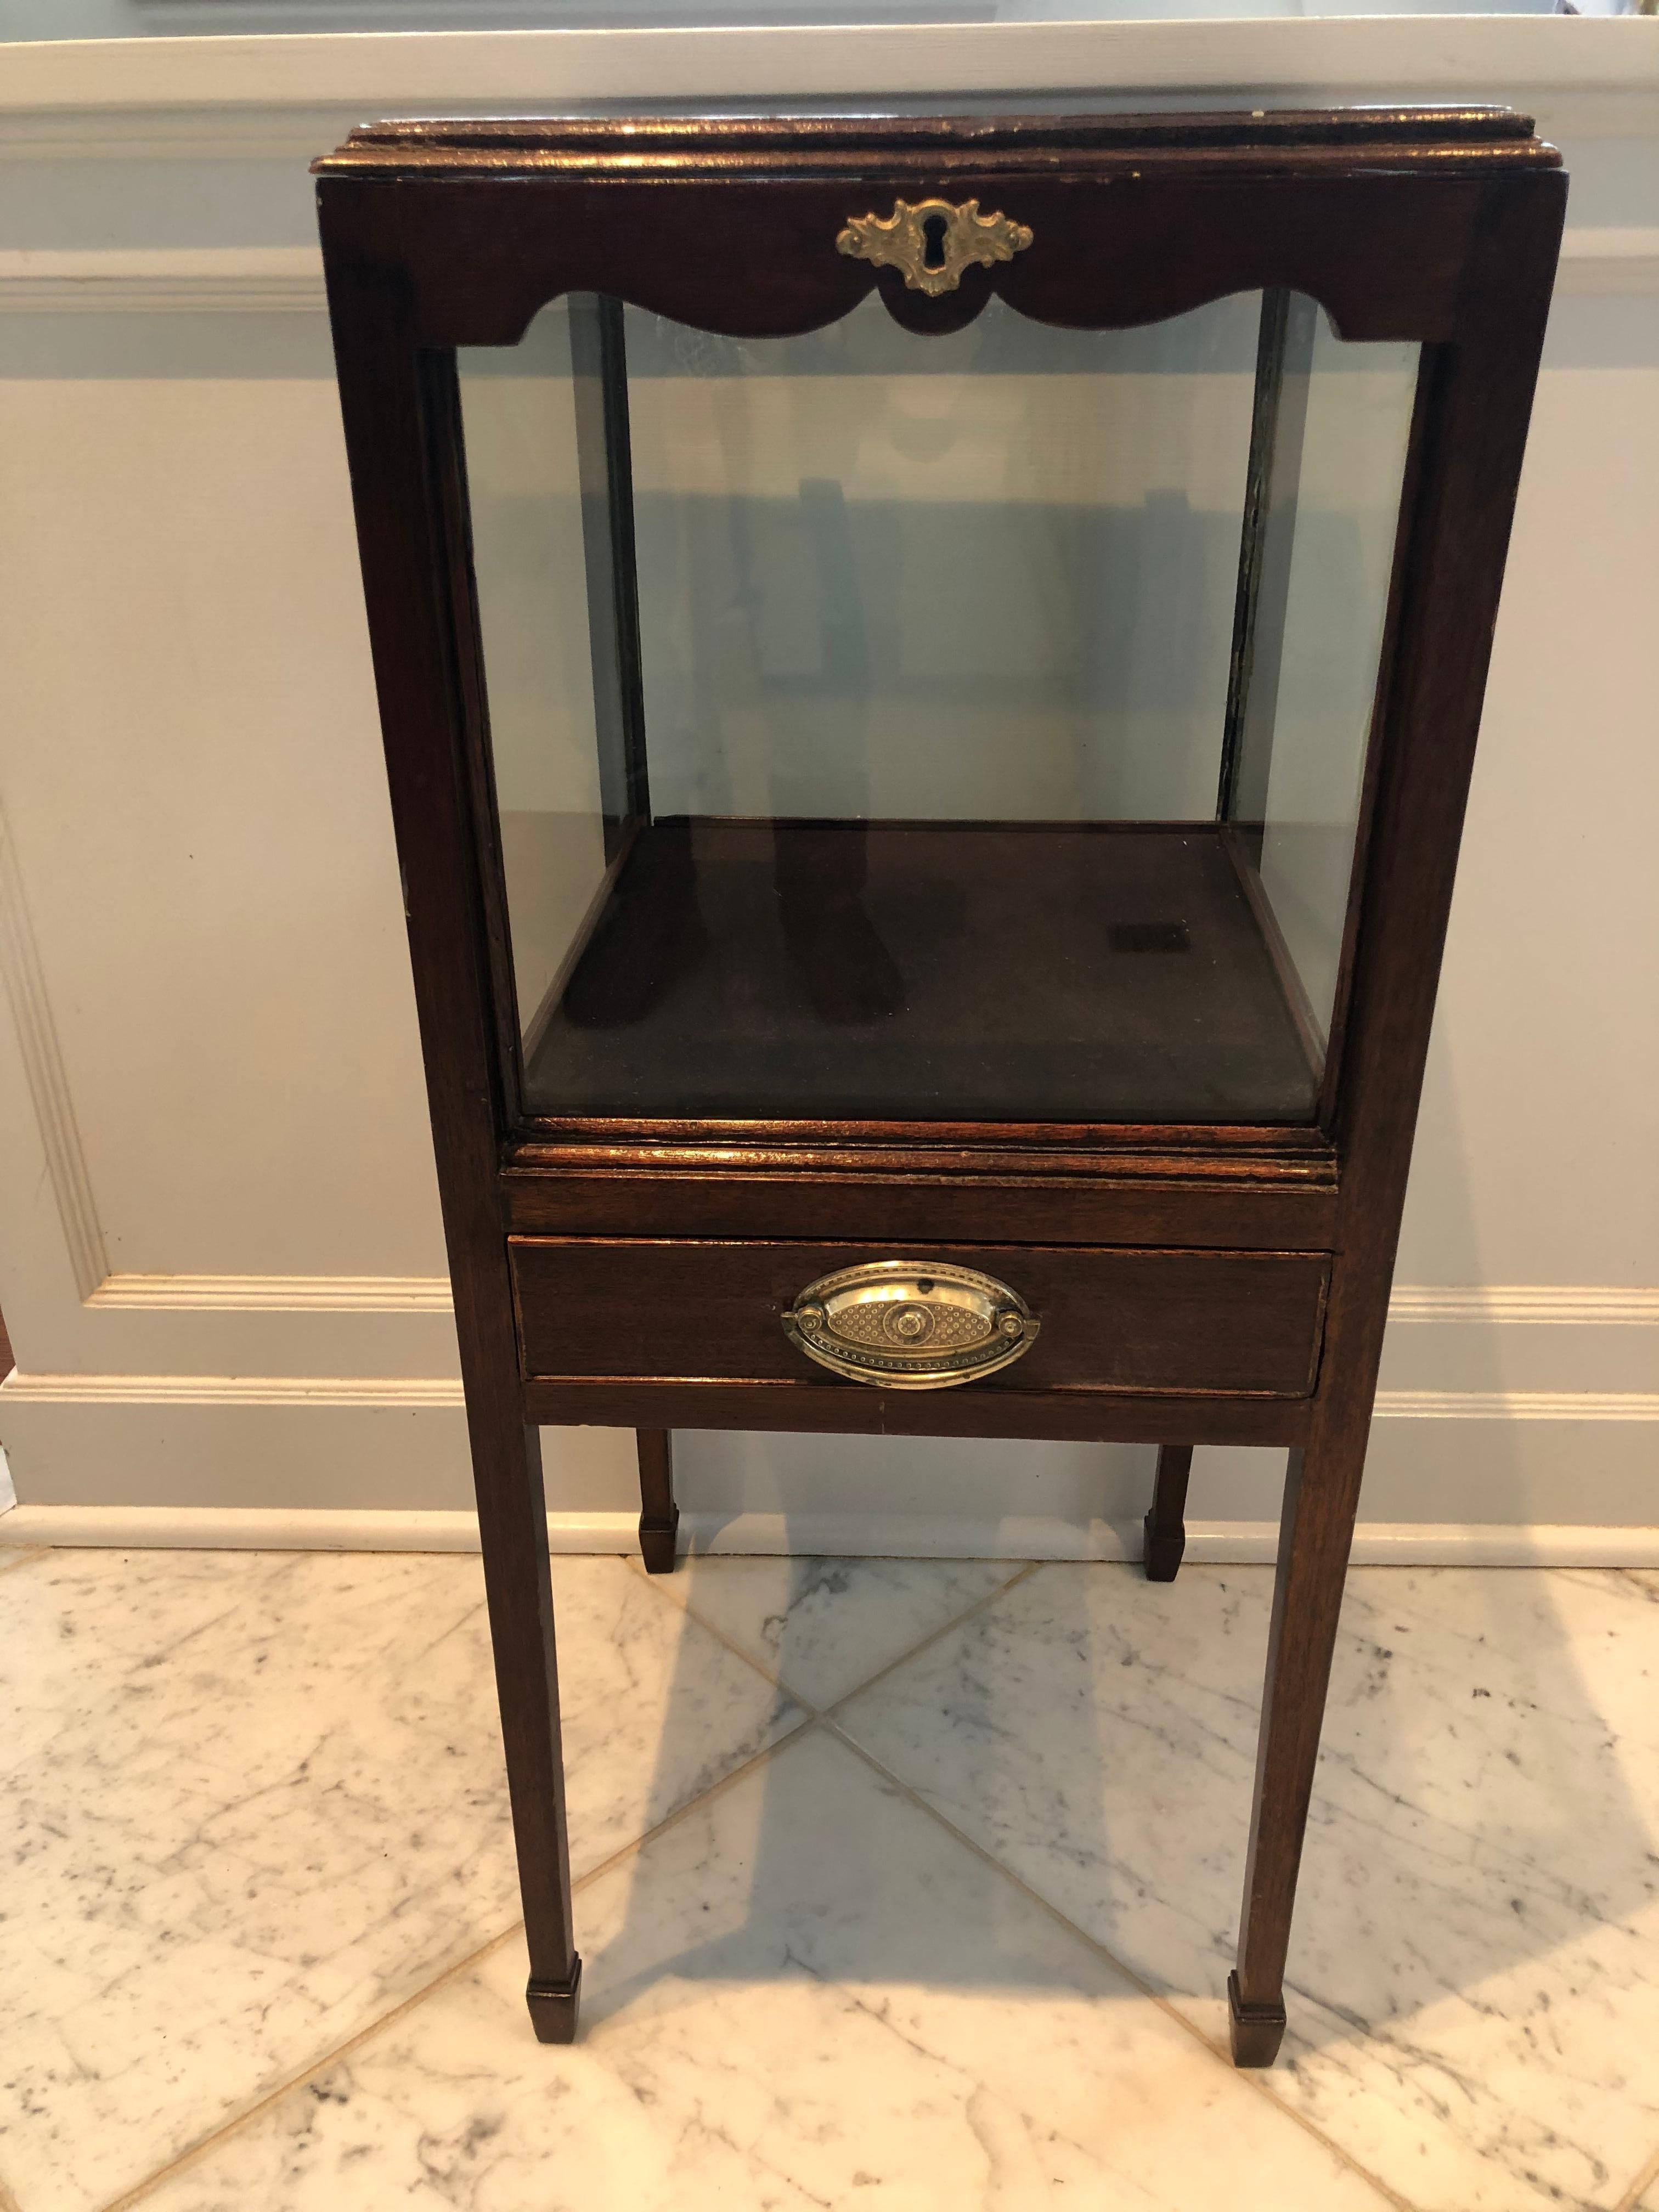 An antique oak vitrine from England cleverly designed to showcase a collection having glass sides and top with scalloped edge wood surround around the top. The top lifts up and there is a single drawer. The escutcheon and handle are brass (no key).